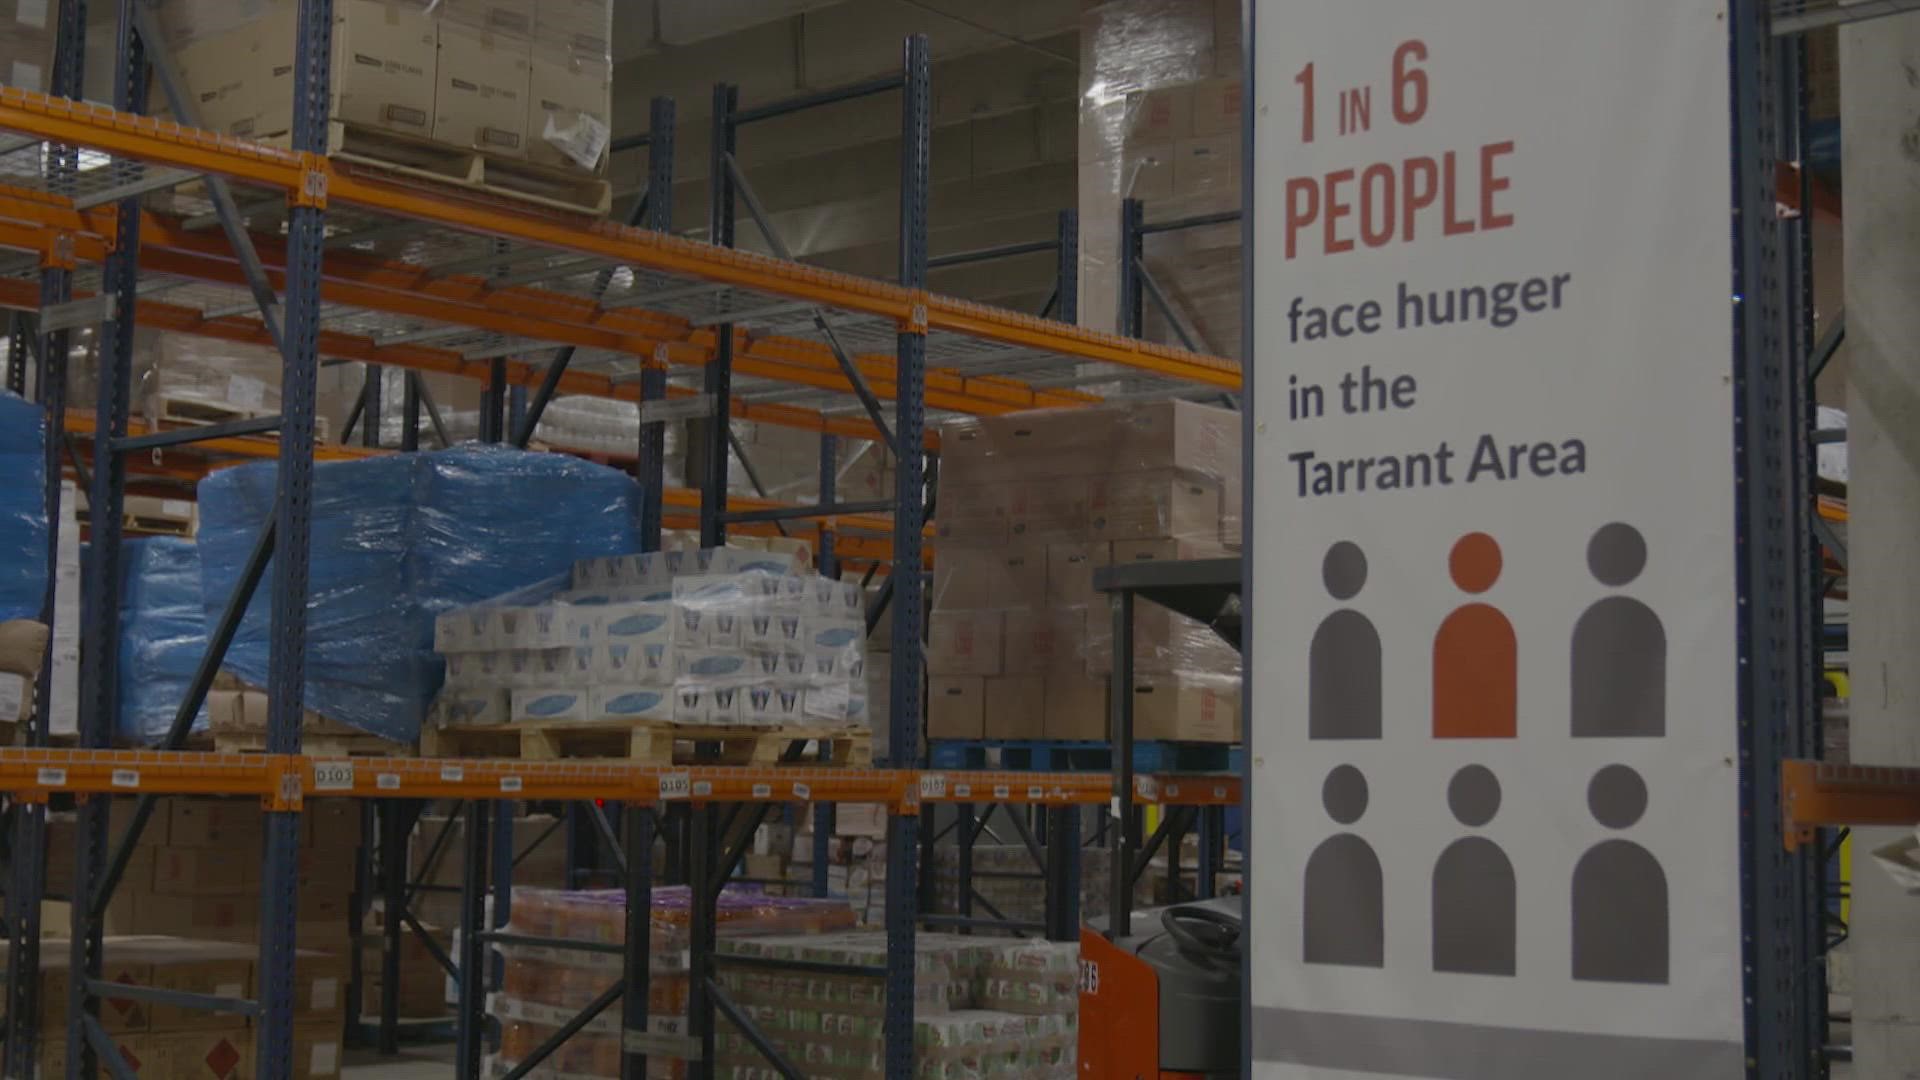 Record-high inflation is trickling down to food banks. Tarrant Area Food Bank is facing a 22% decline in food donations from grocers.